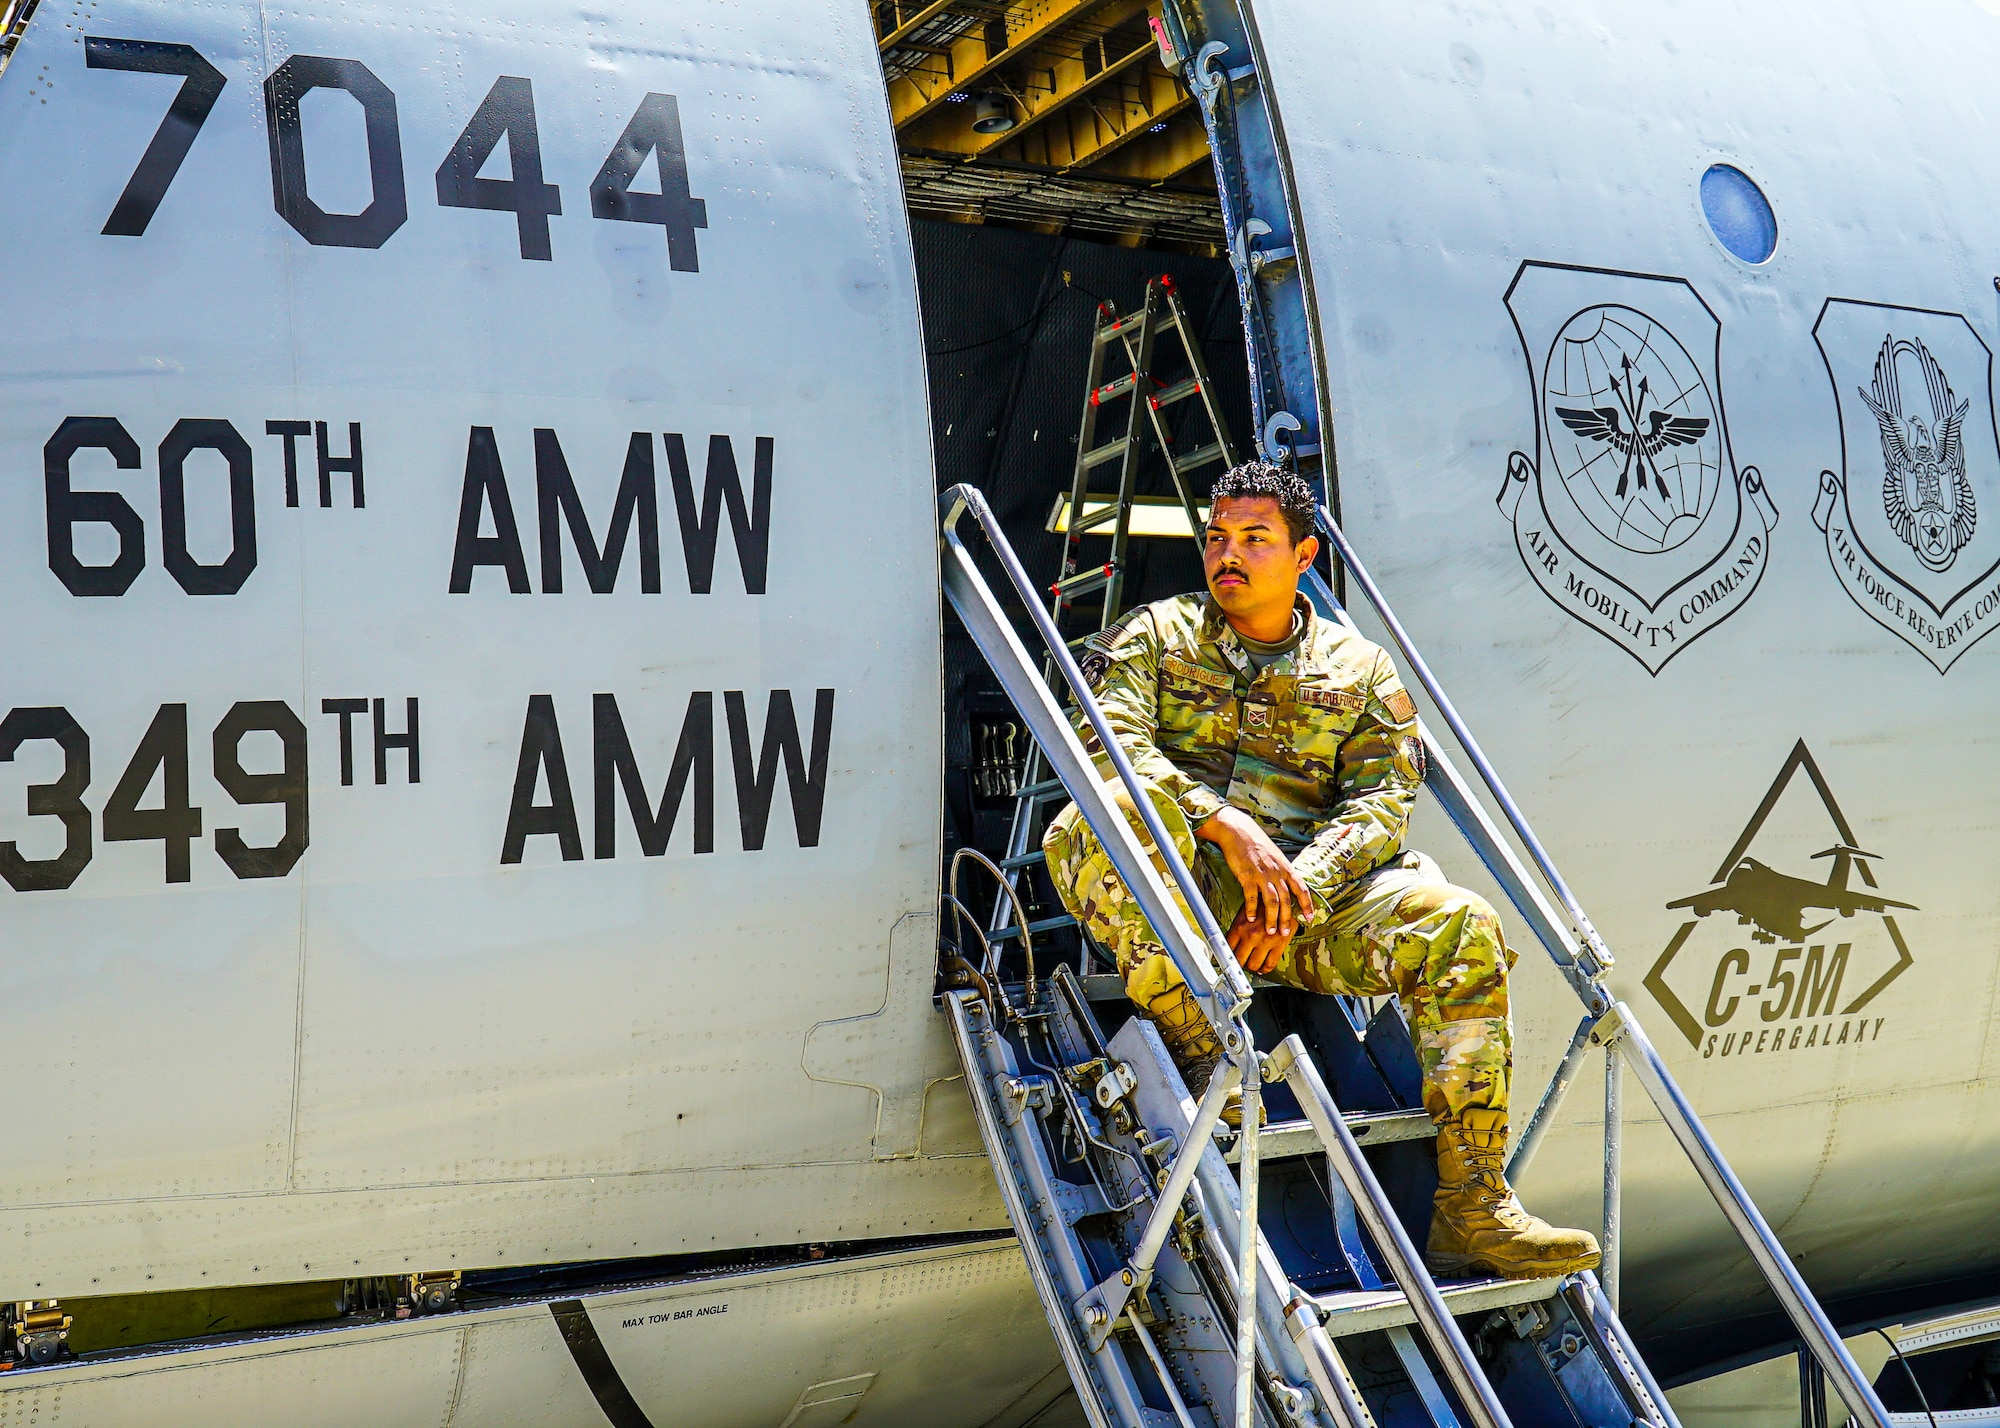 An Airman is sitting down on the ladder used to climb into the plane.